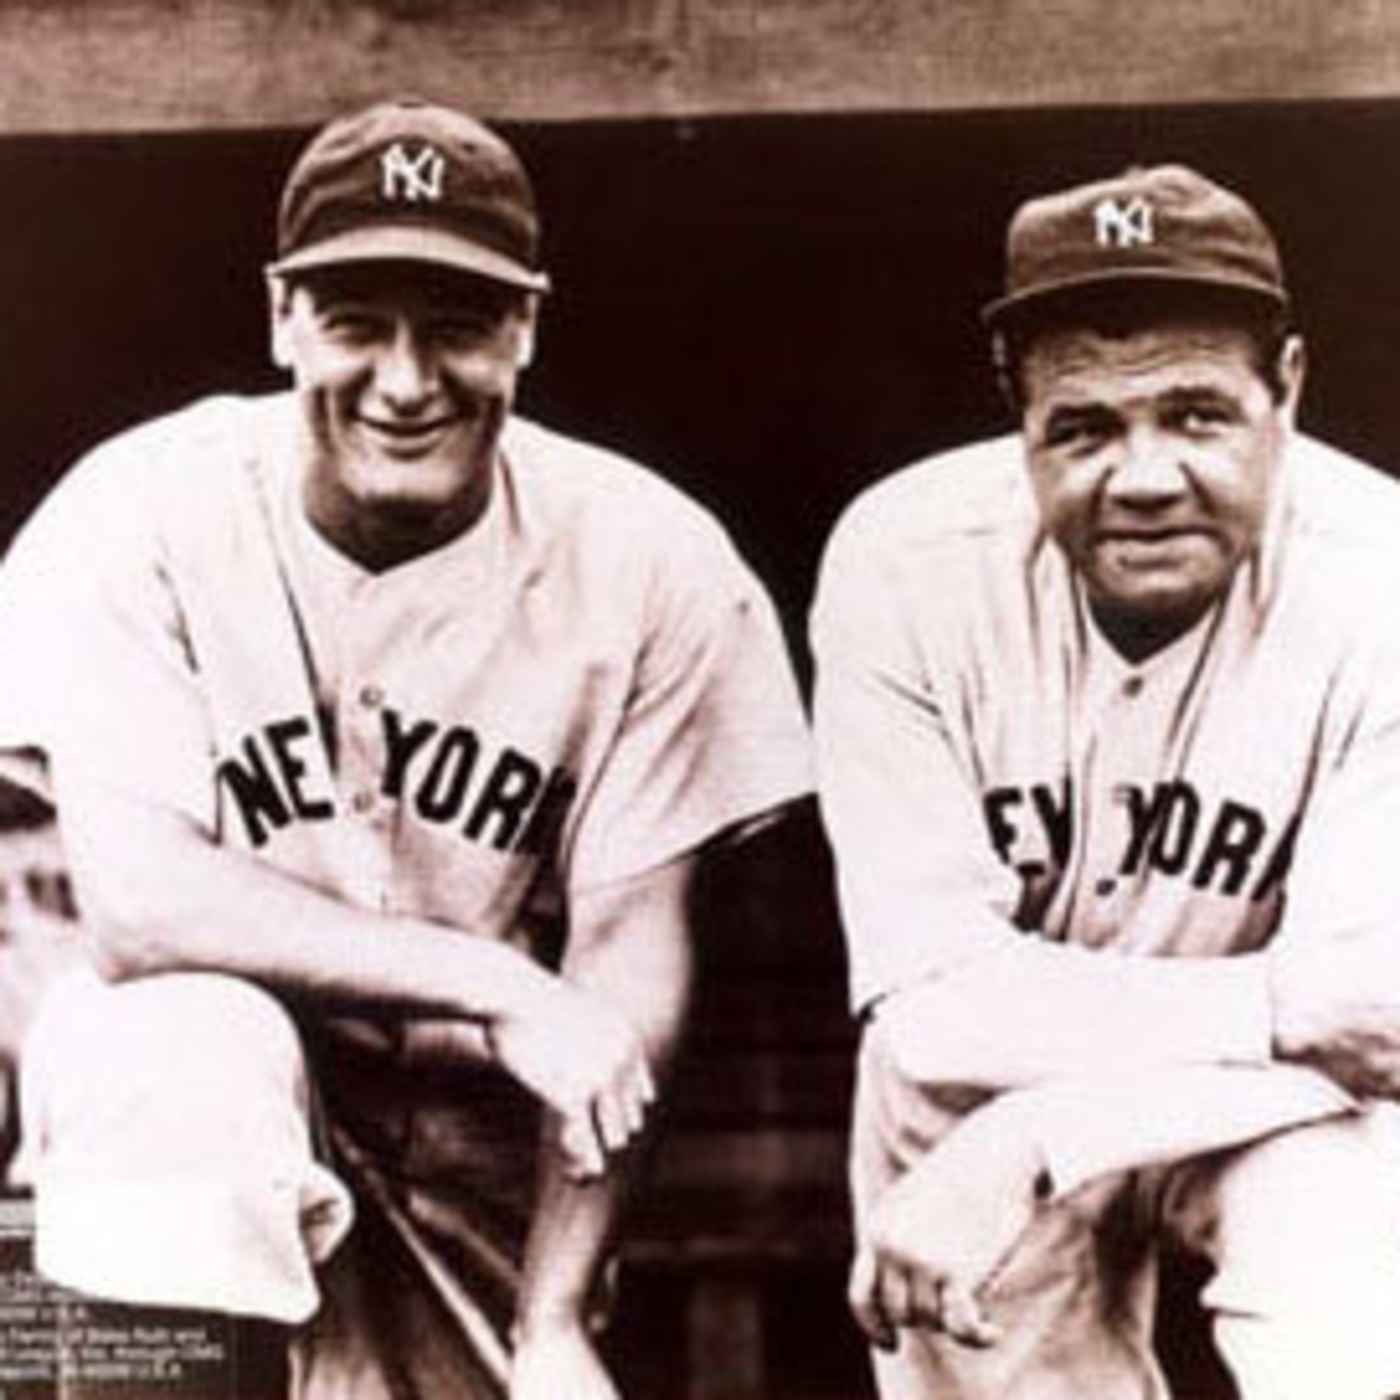 adventures of babe ruth390416